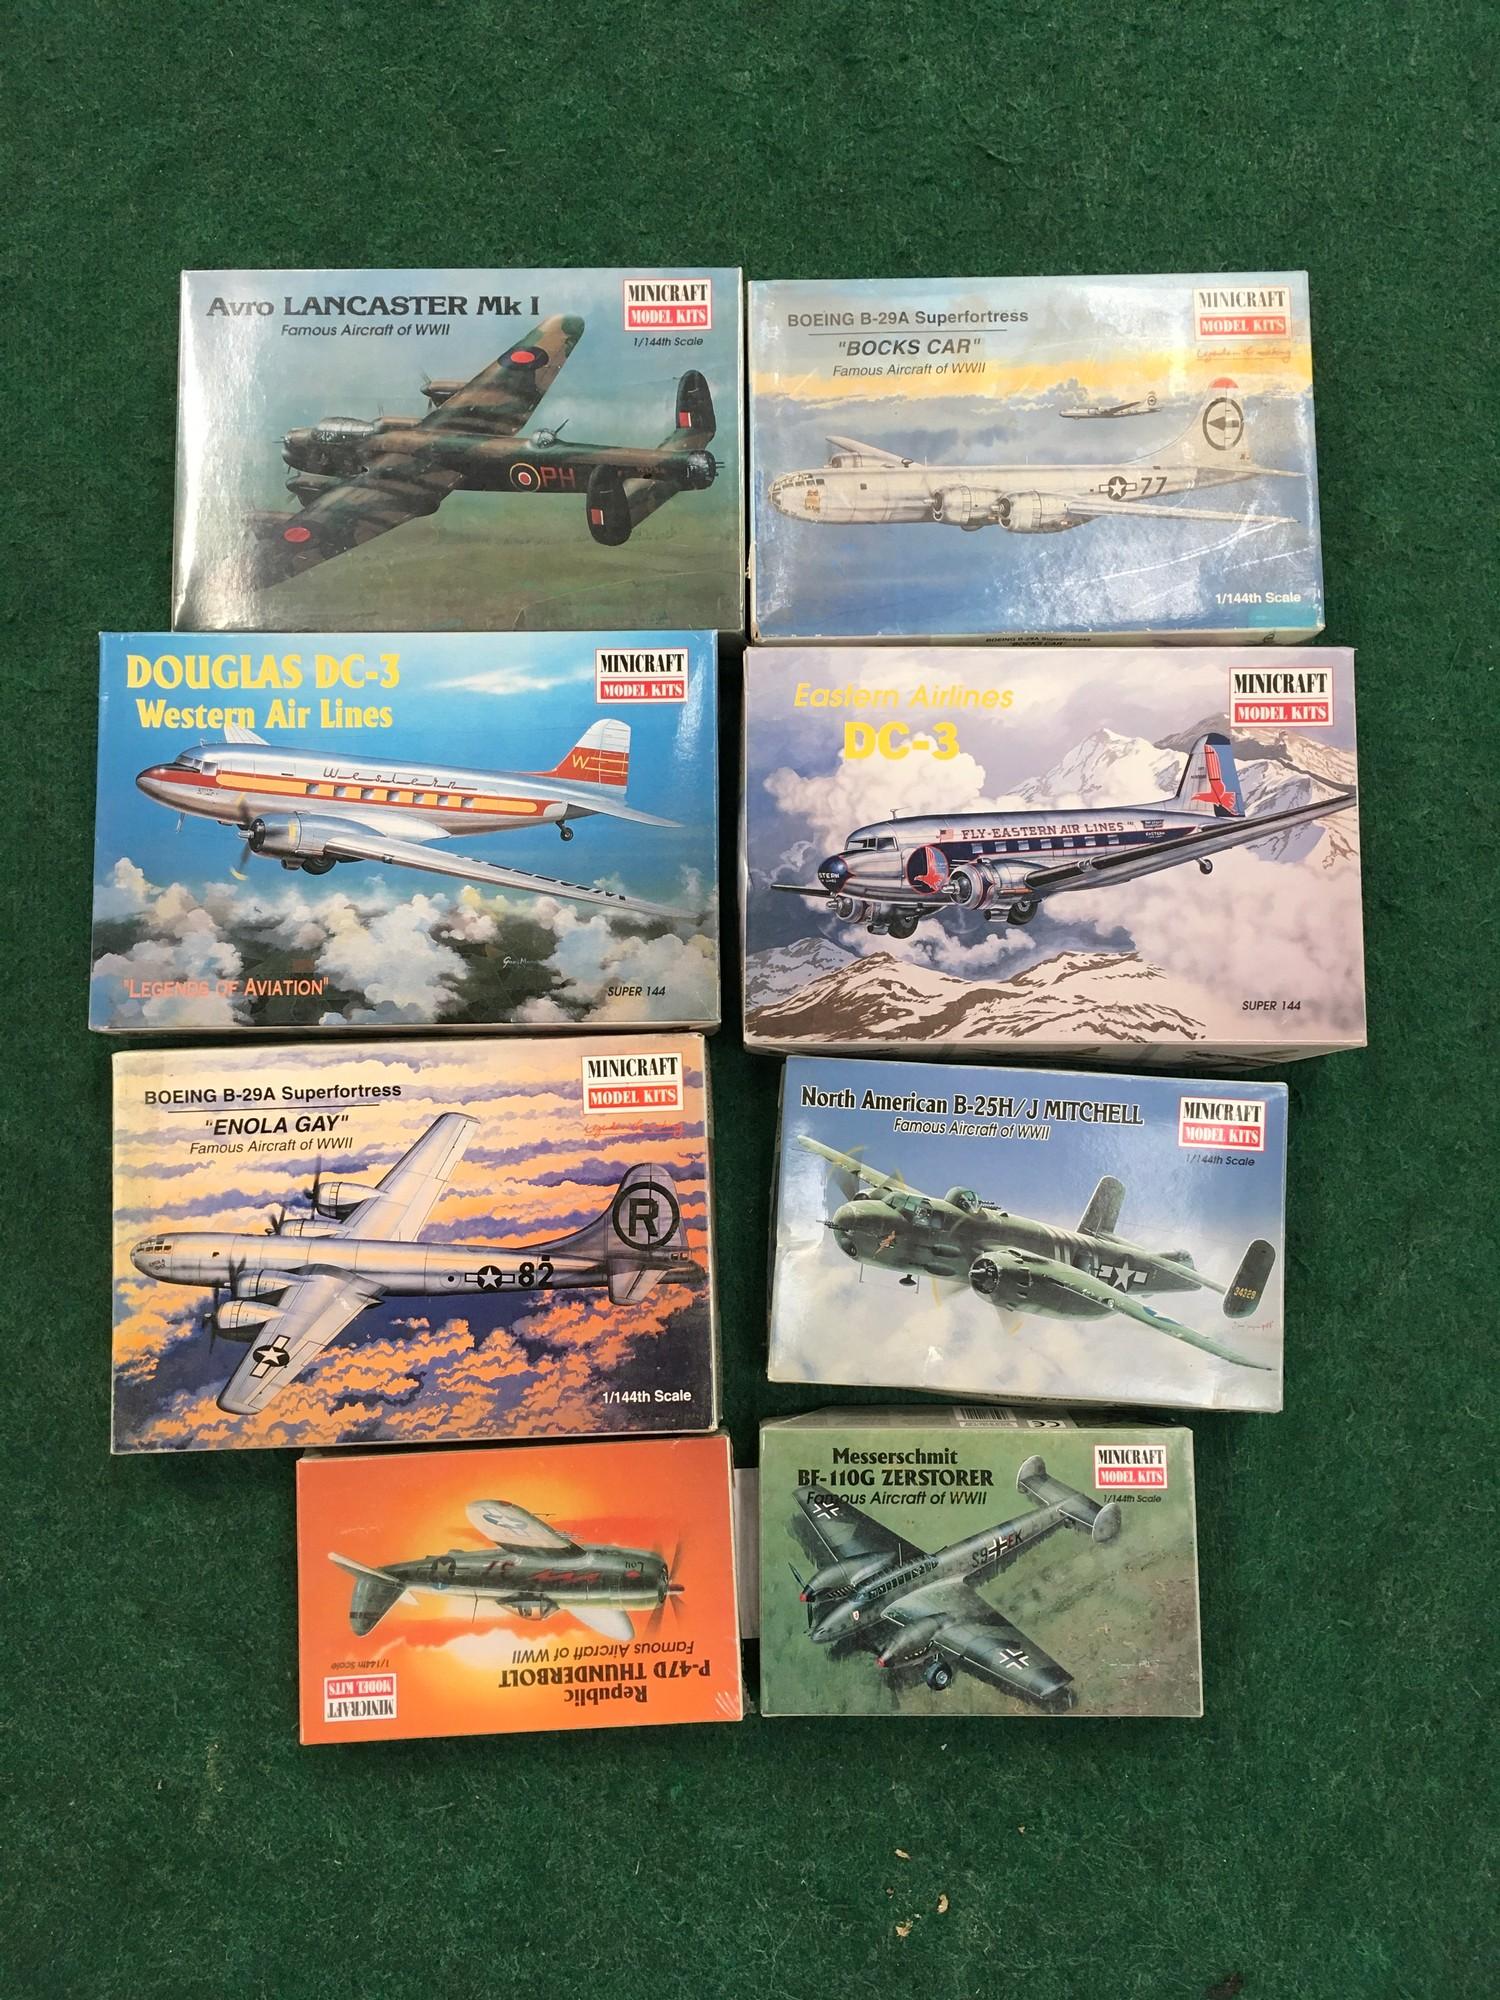 Eight model kits by Minicraft to include Eastern Airlines DC-3, Avro Lancaster Mk 1 and others.